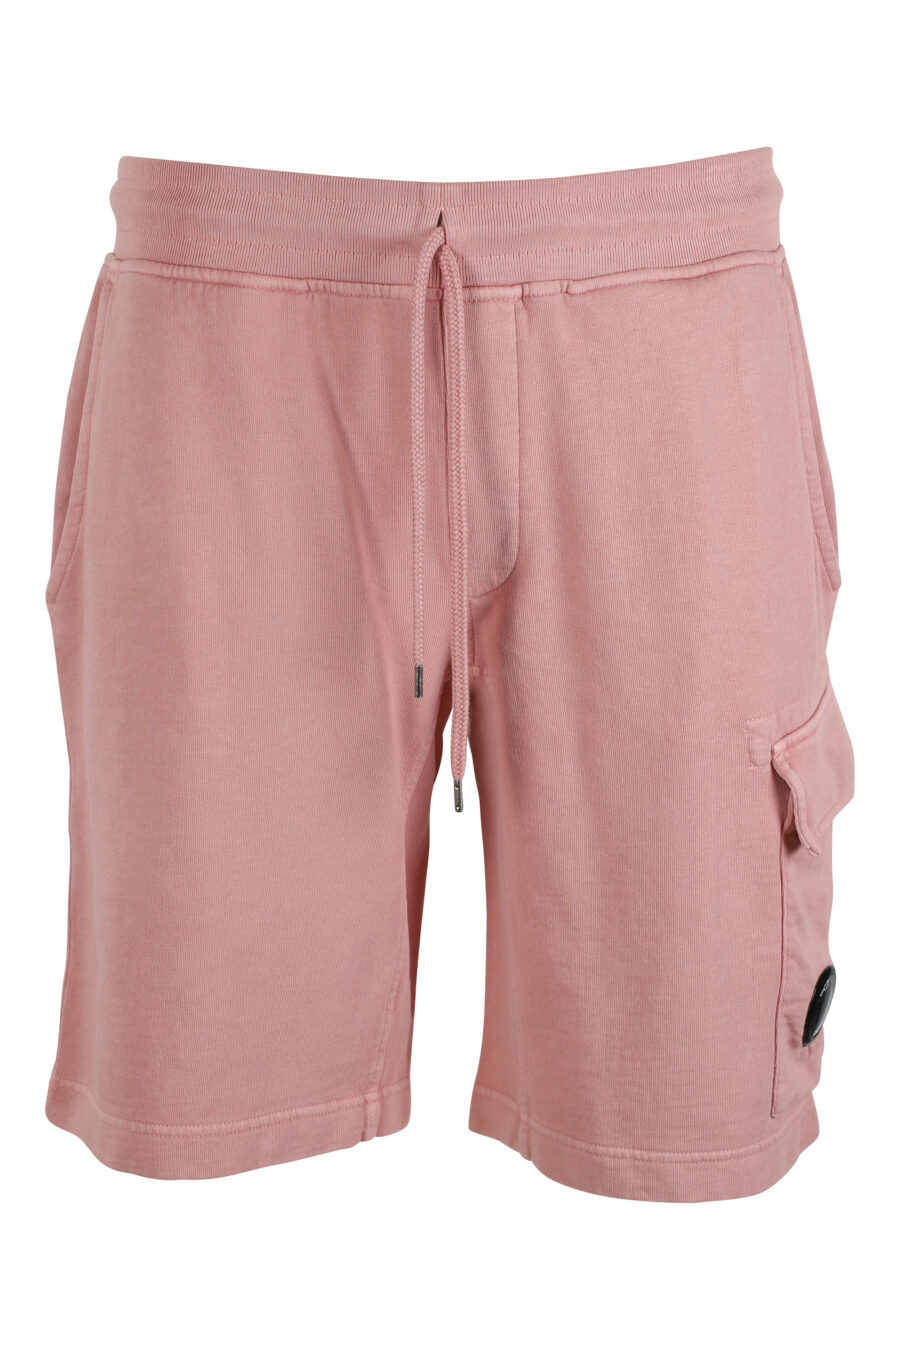 Tracksuit bottoms pink cargo style with circular mini logo - IMG 9517